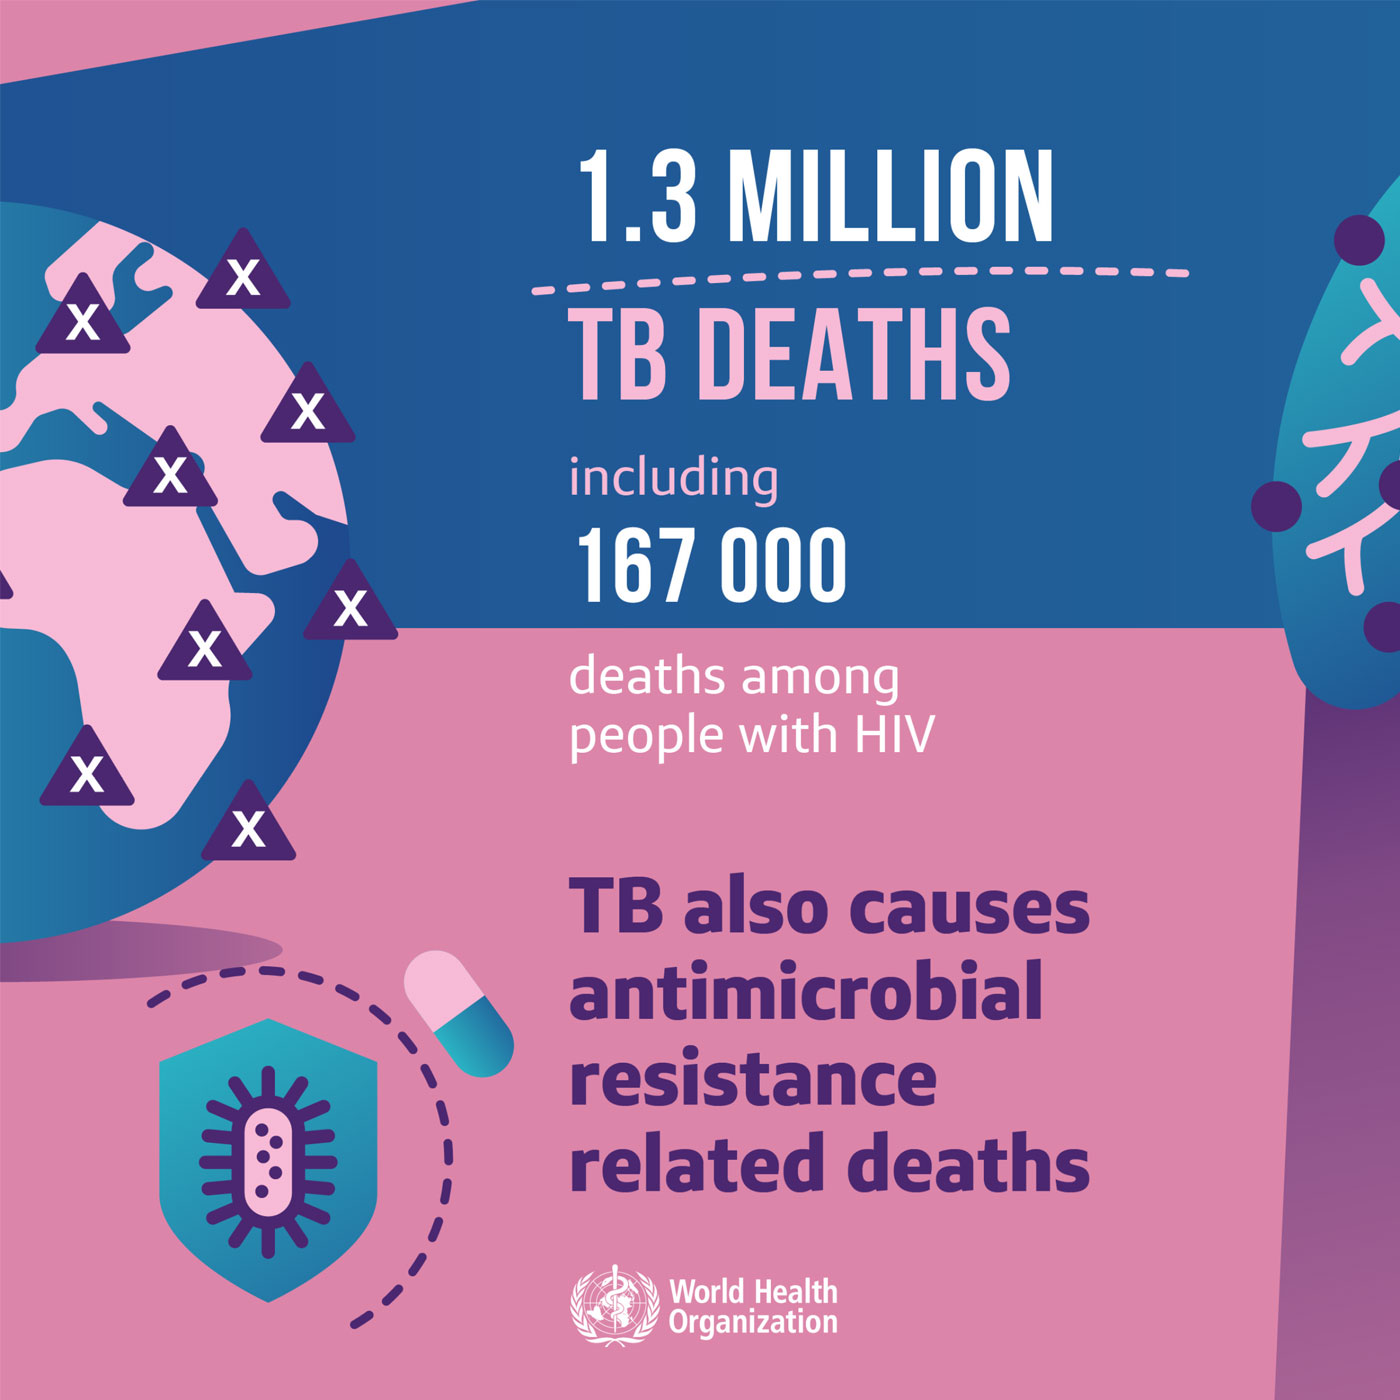 TB also causes antimicrobial resistance related deaths